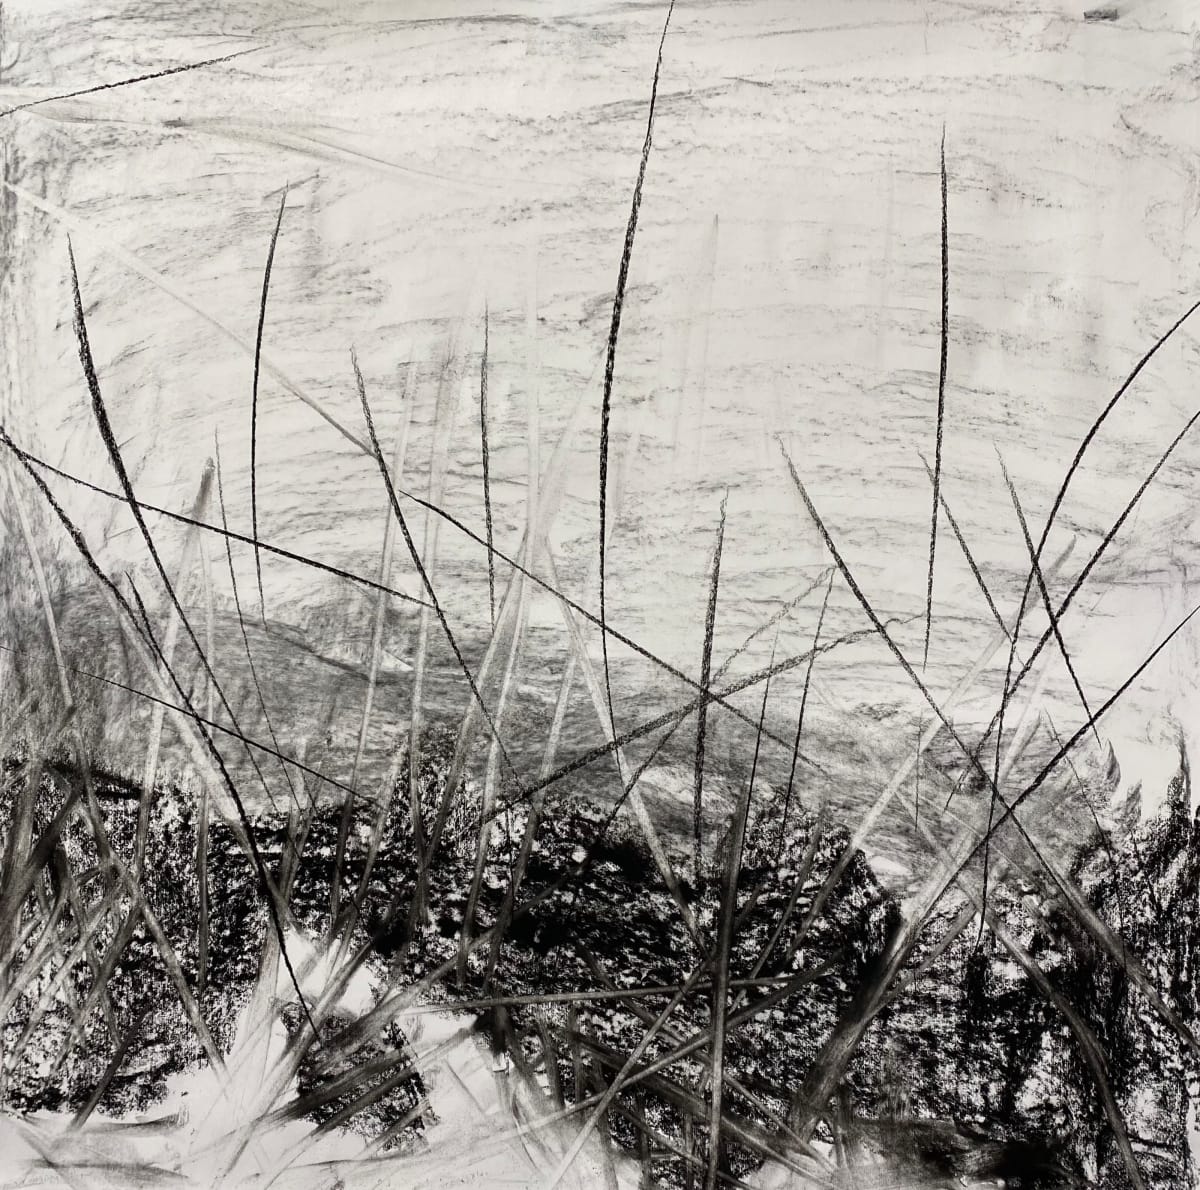 2182, Juanita Bellavance, Sketch15, From the Chestatee River Perspective, 2021, Charkole on paper, 24 x 24 inches 